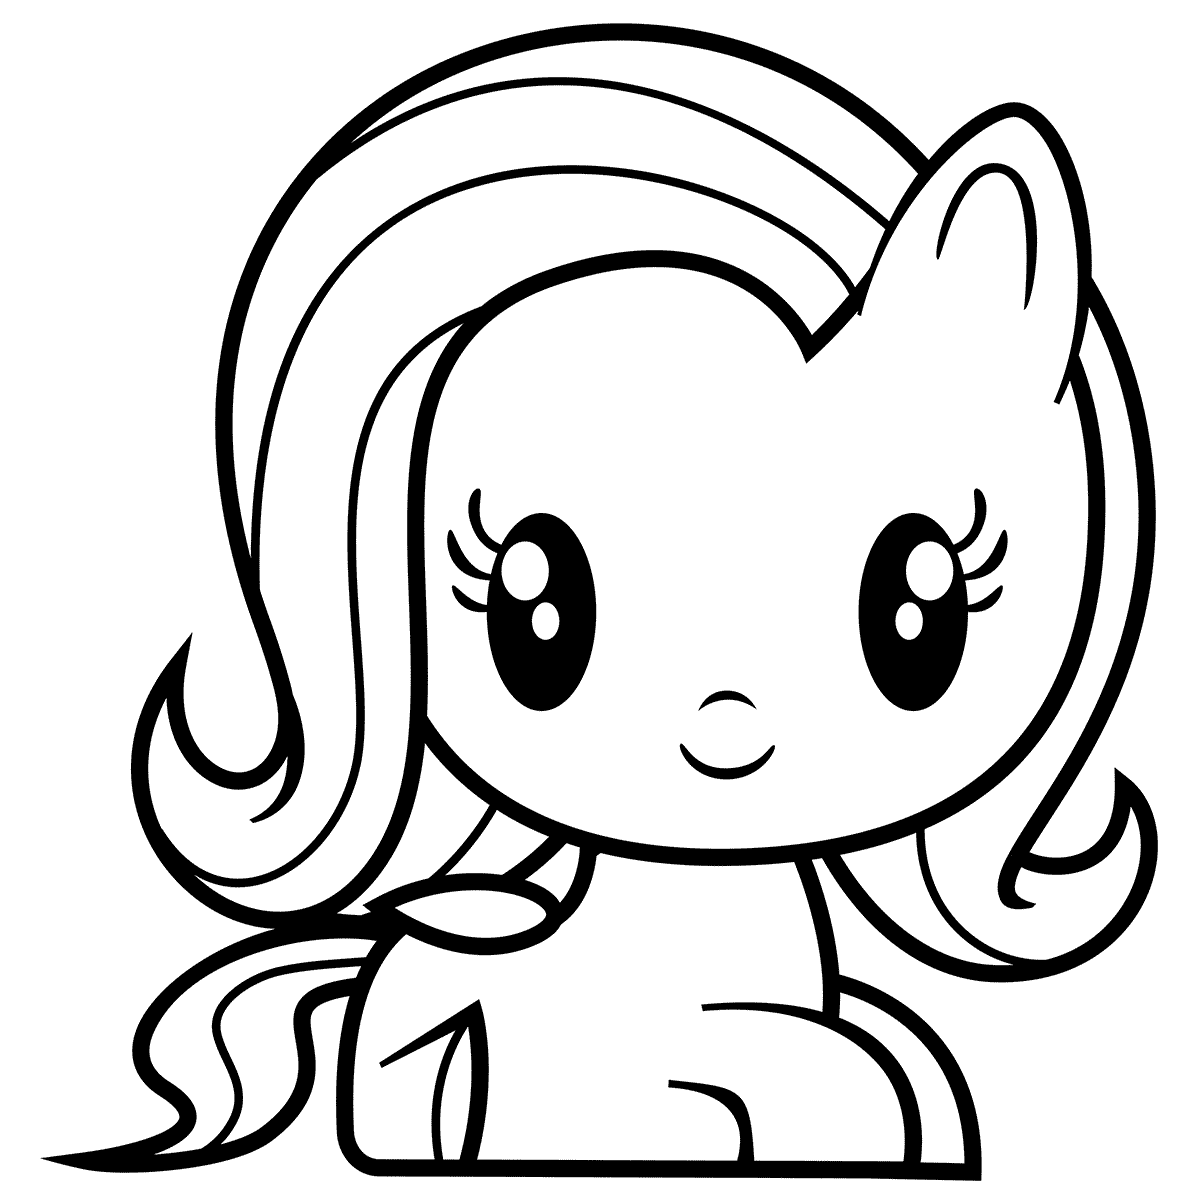 Cutie Mark Crew Fluttershy Coloring Page